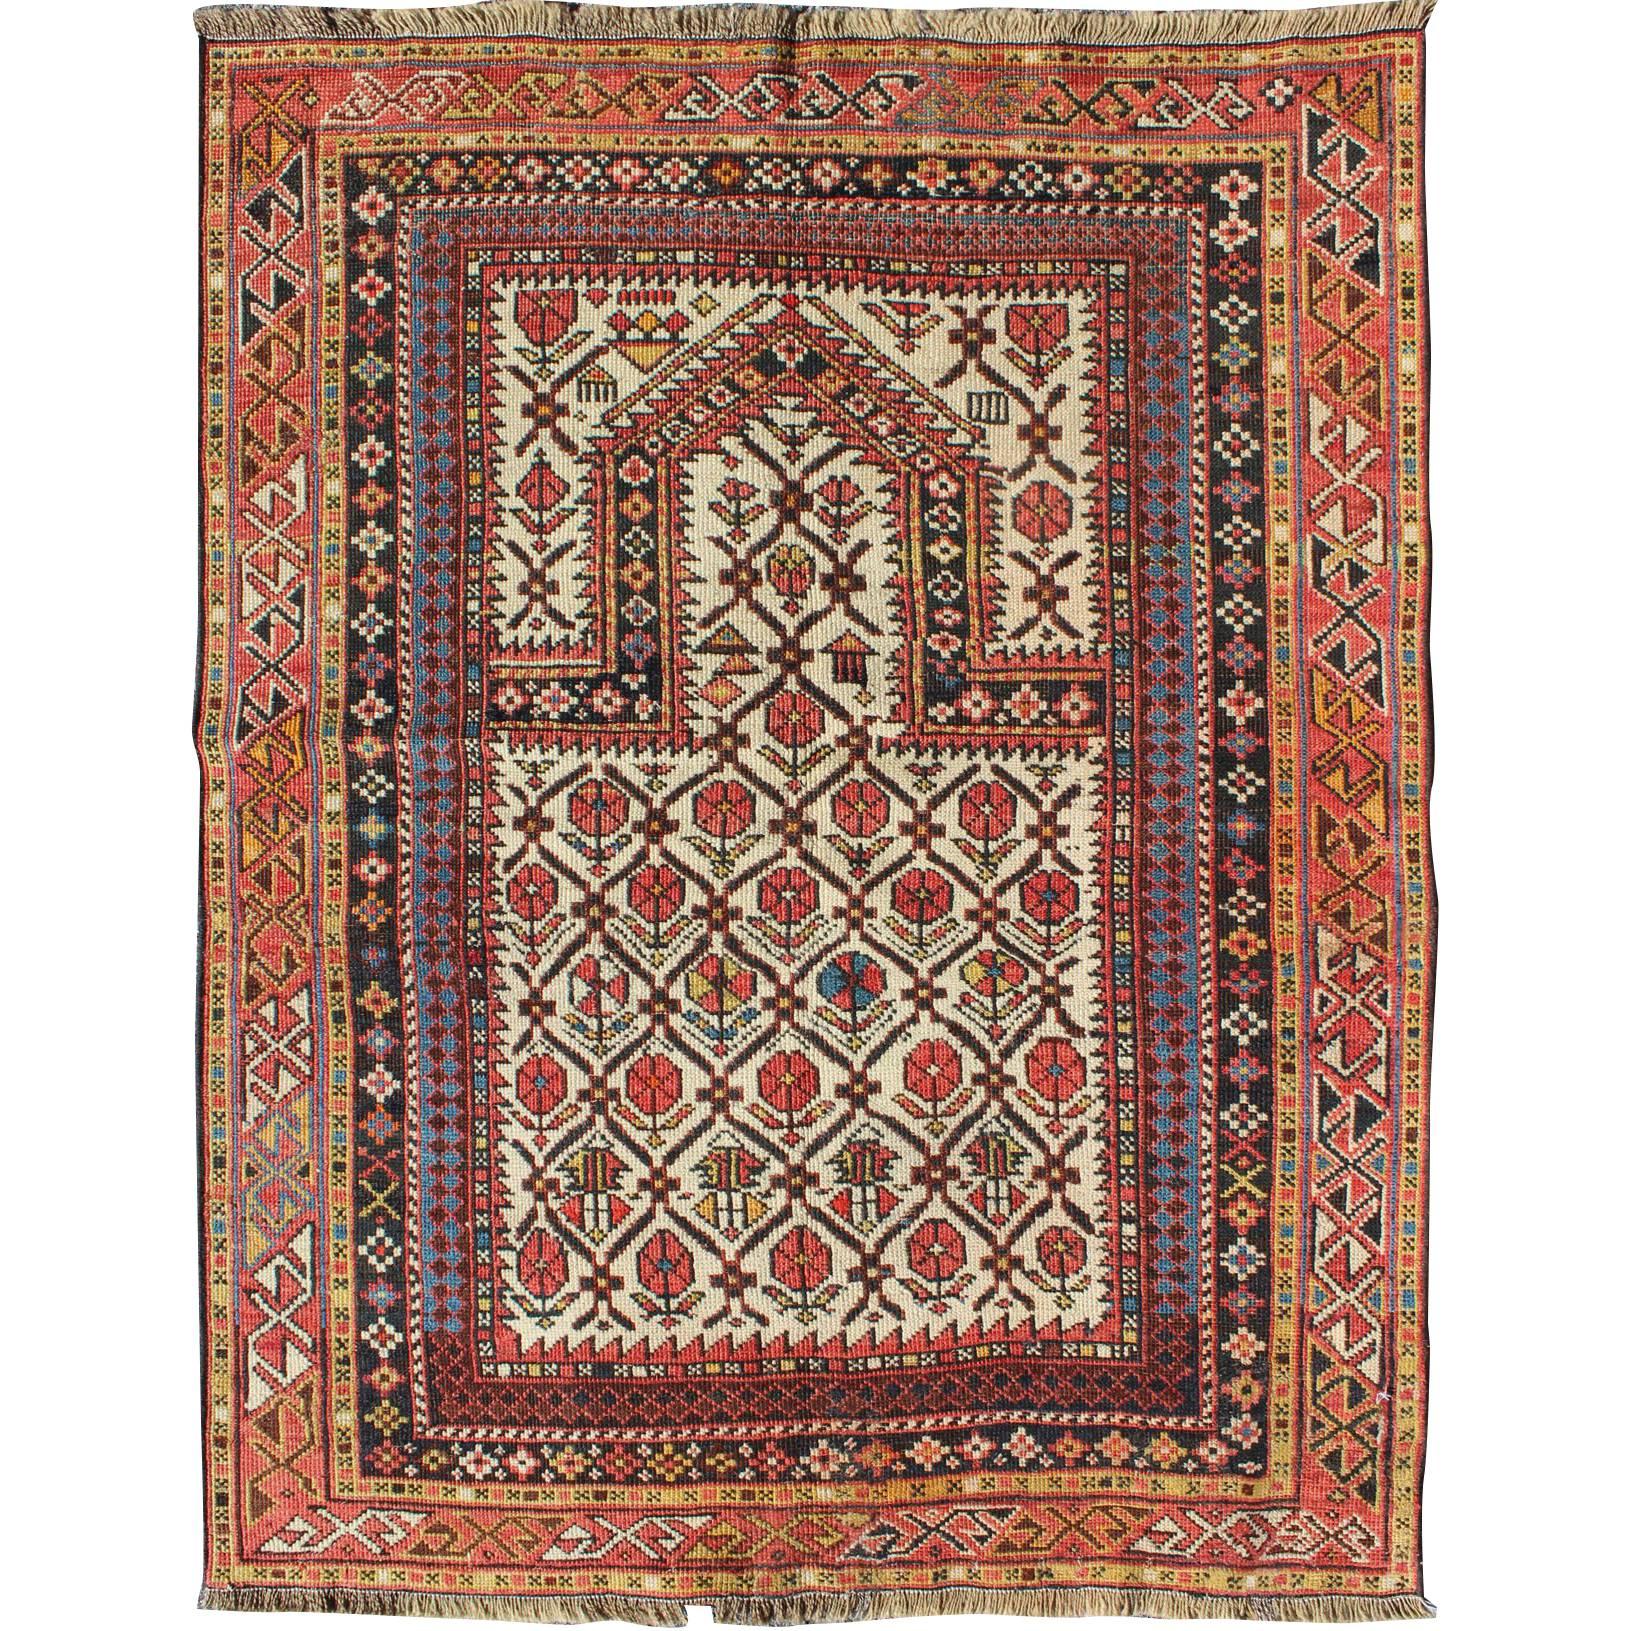 Antique Shirvan Prayer Rug with All-Over Floral Design and Geometric Borders